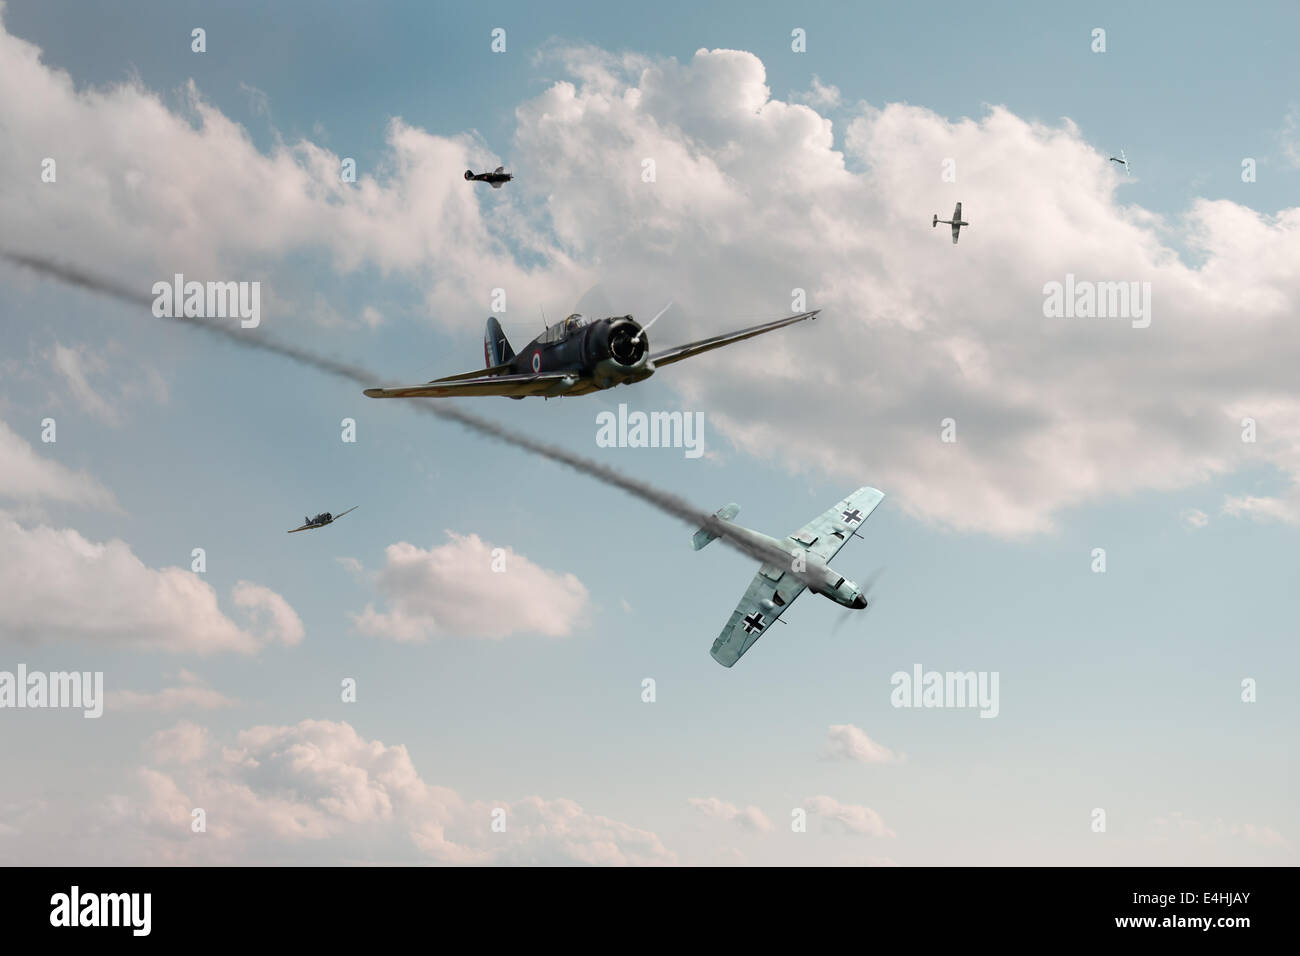 The first aerial combat victories on the Western Front in World War II were claimed by French Armee de l'Air pilots. Stock Photo